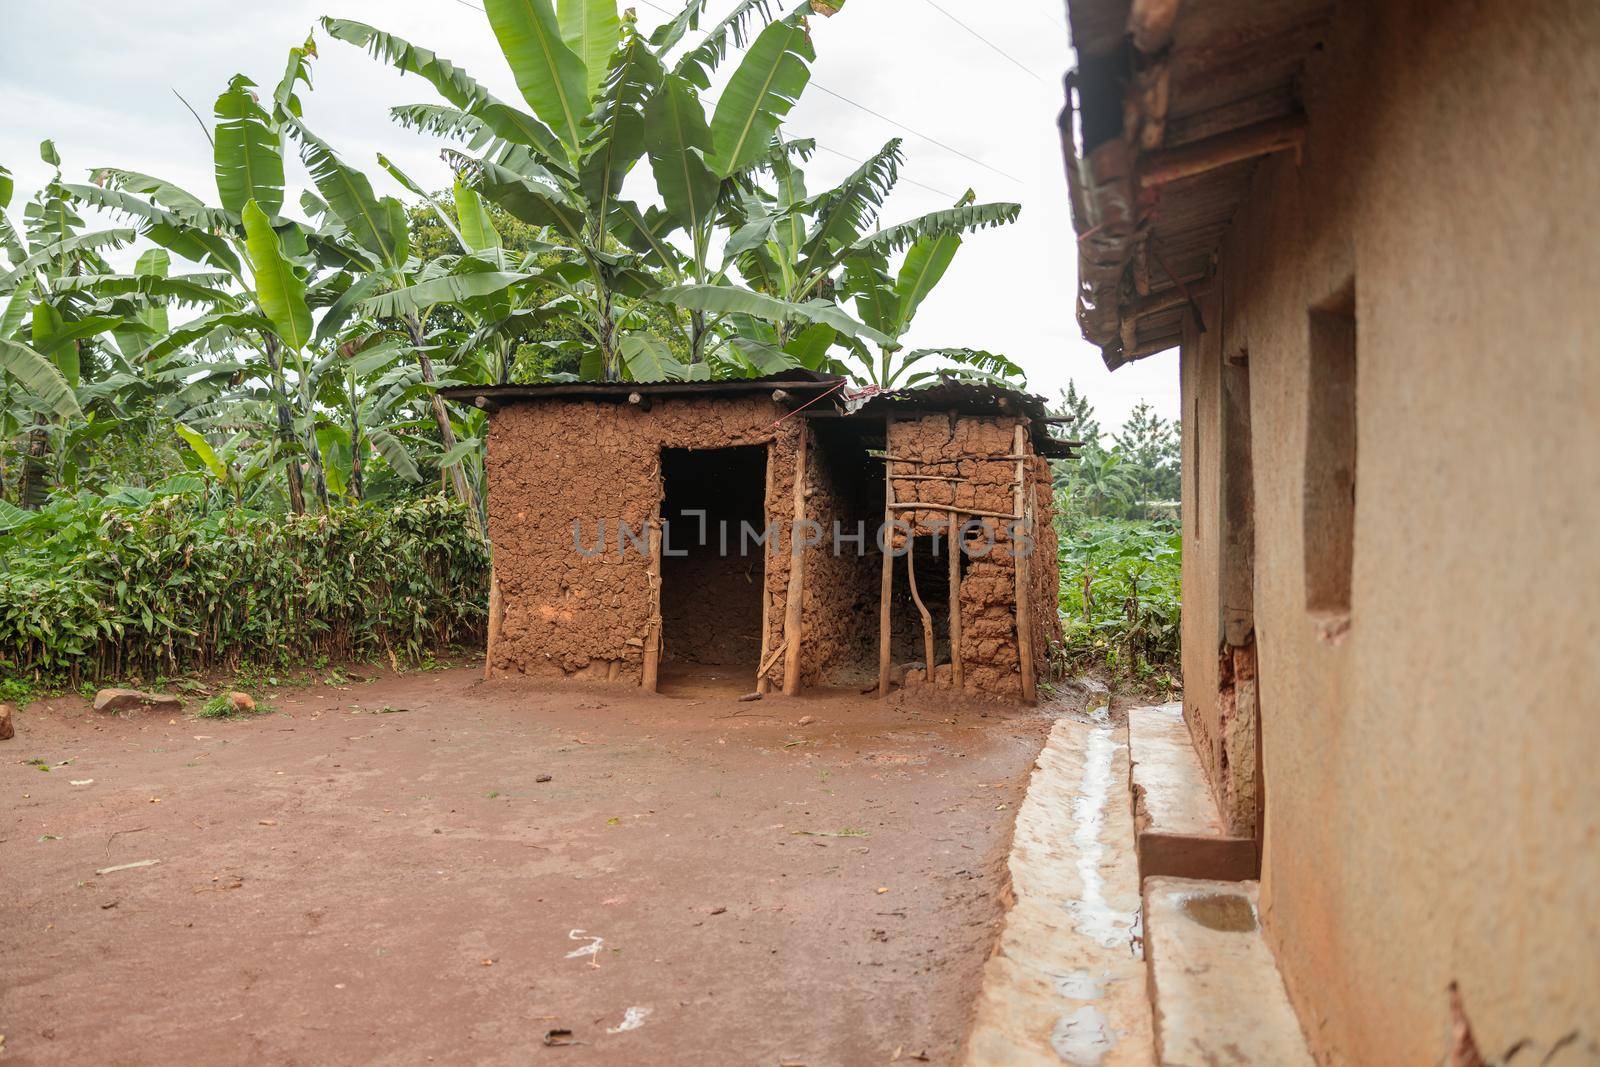 Old traditional house made of animals dung, clay and hay, Rwanda, Africa